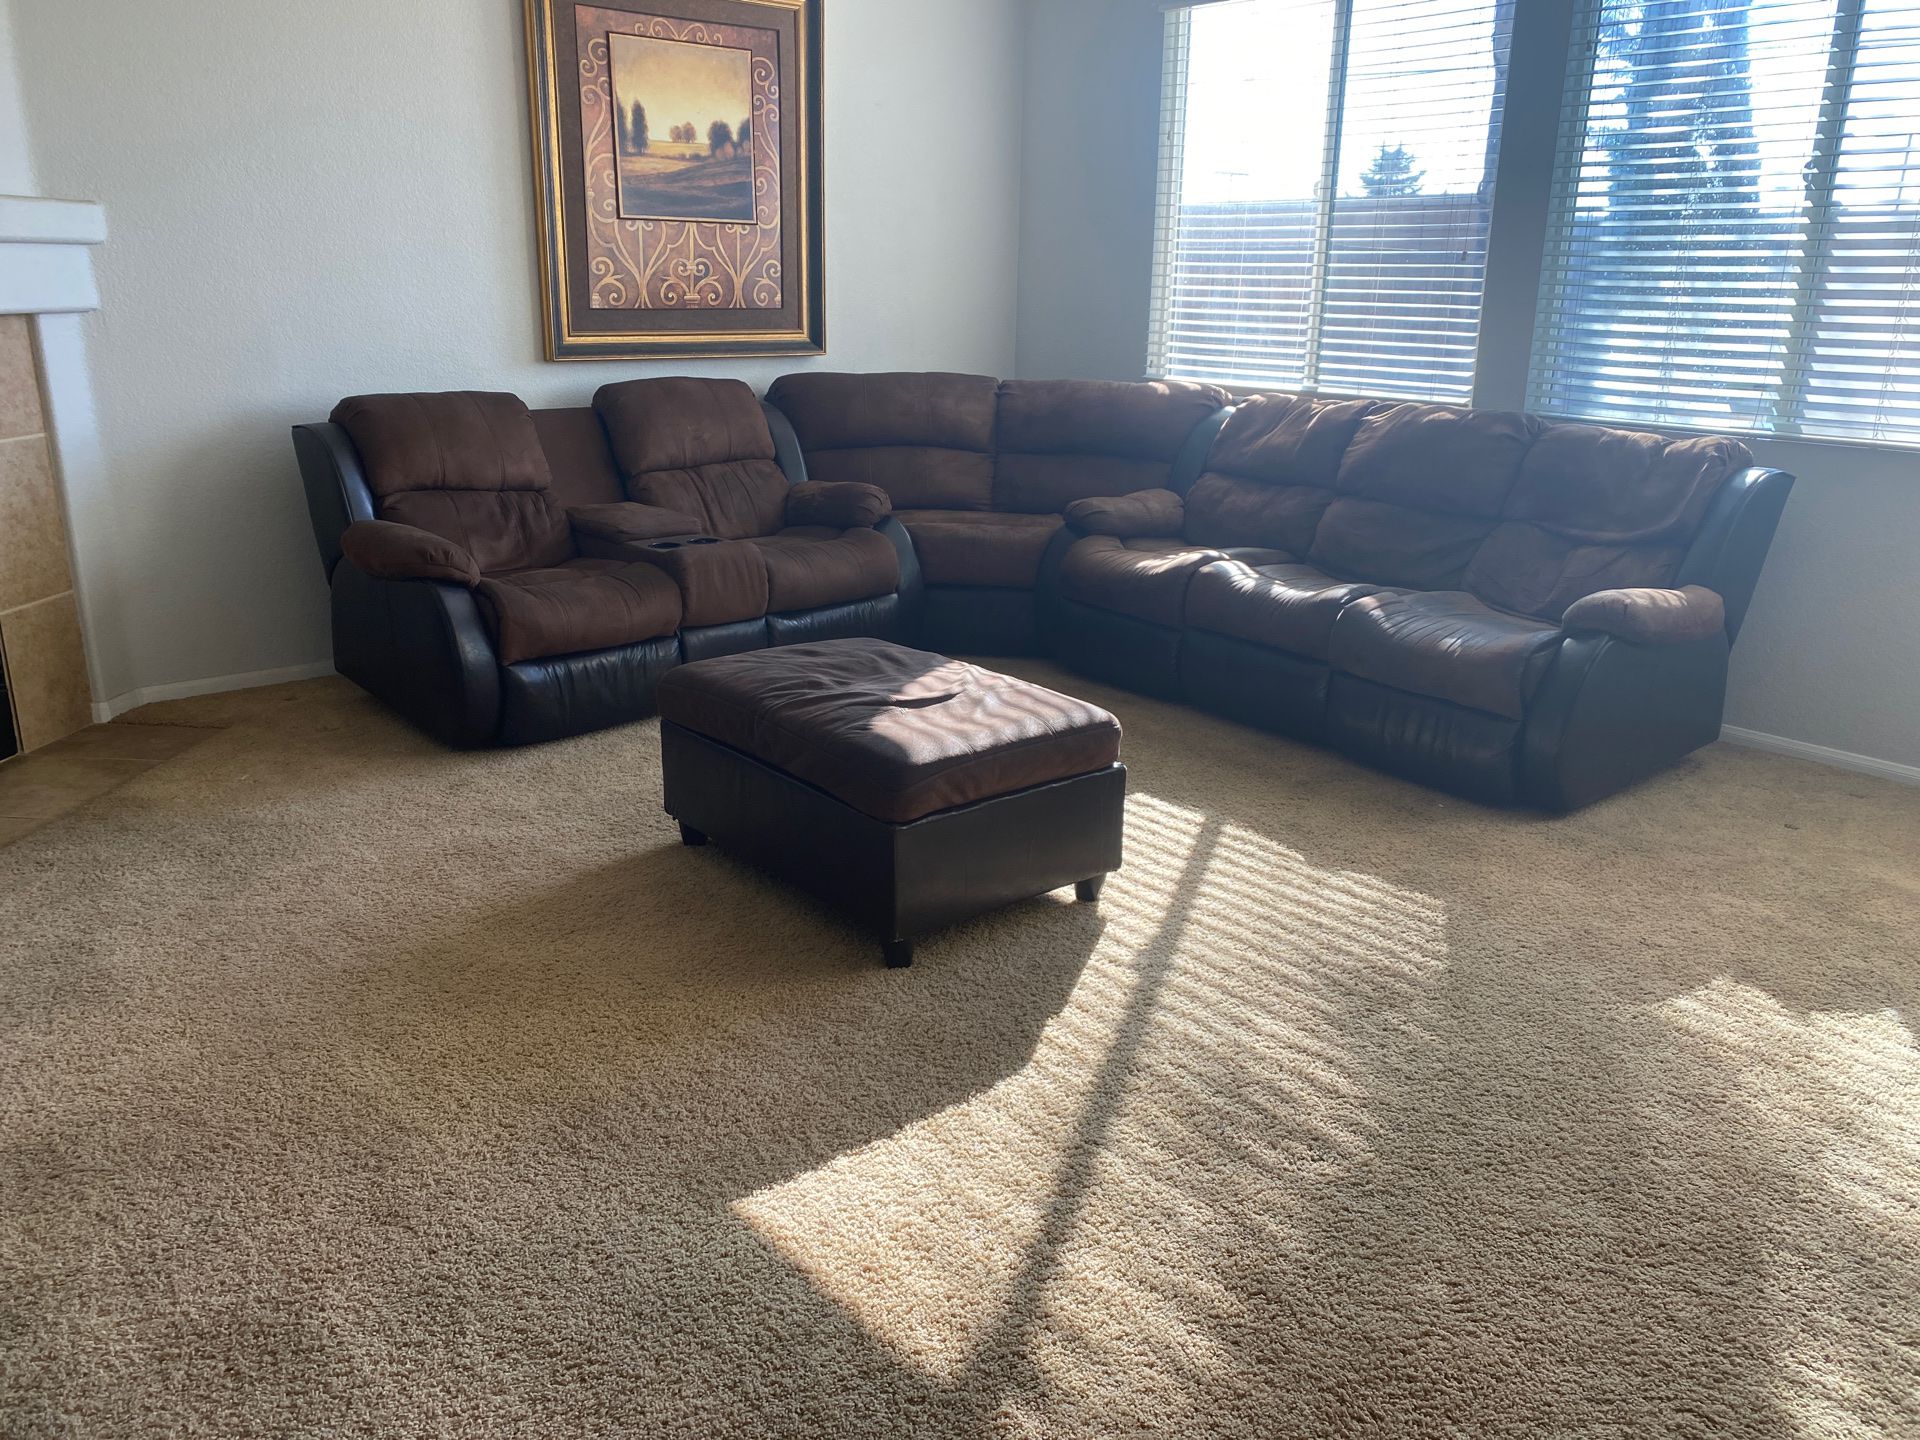 3 Pc Sectional with ottoman